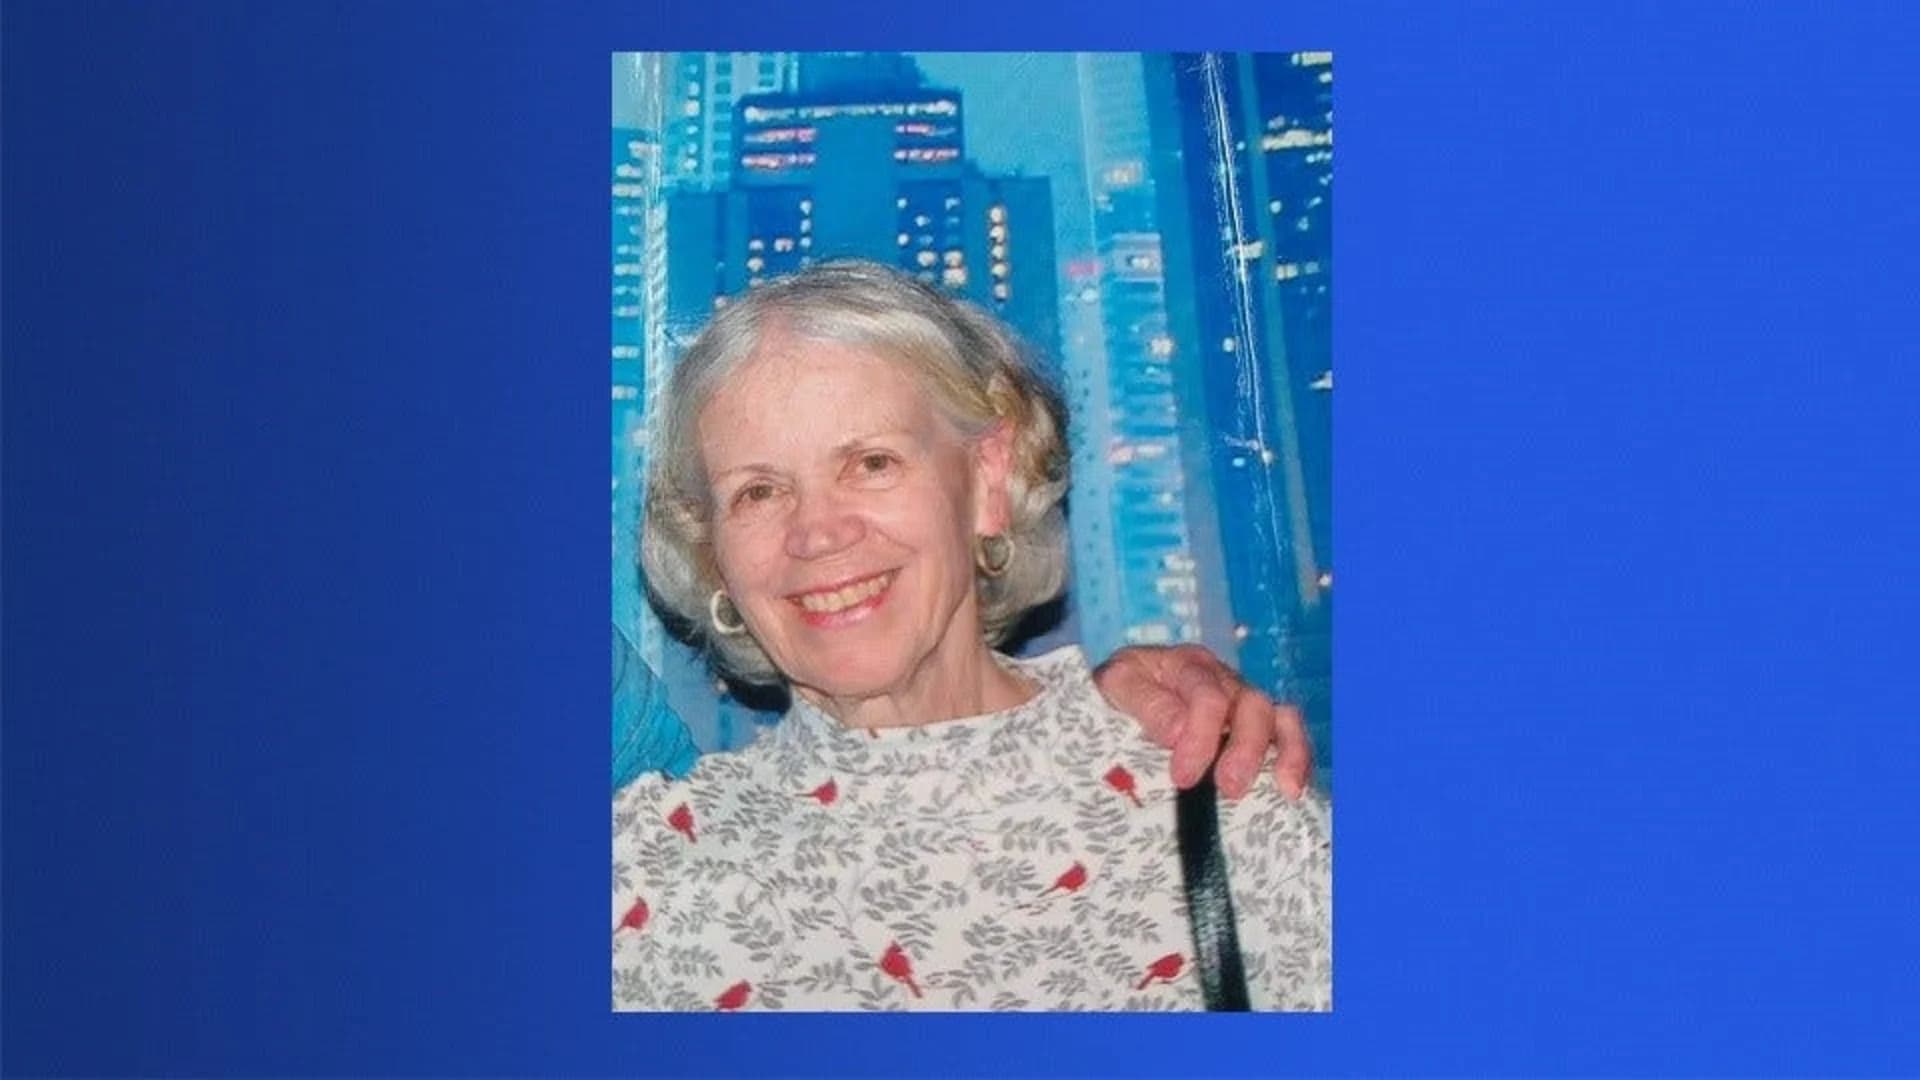 Search underway for missing 80-year-old Toms River woman